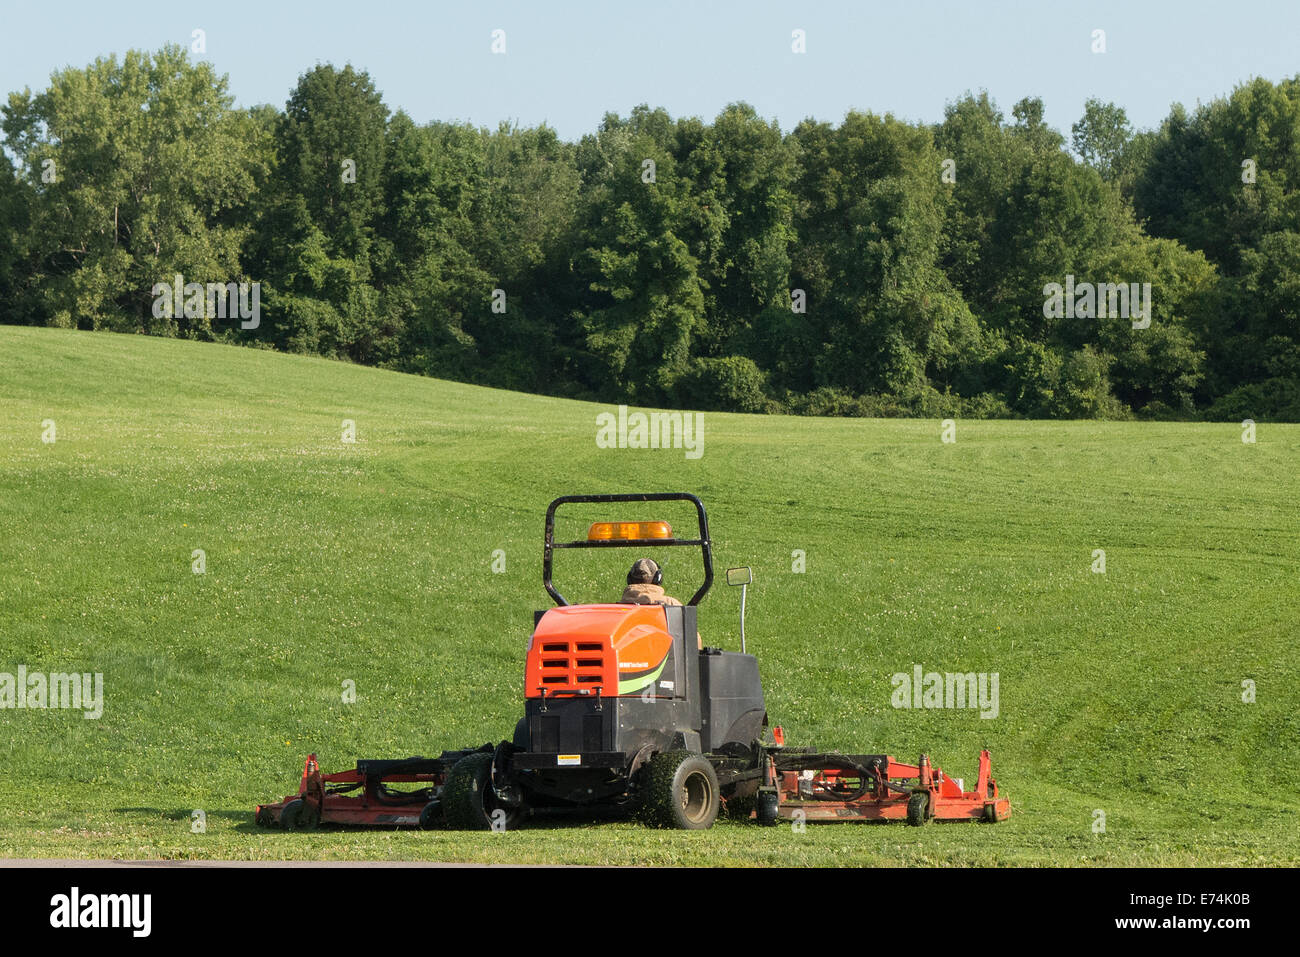 Lawn mower in action. Stock Photo